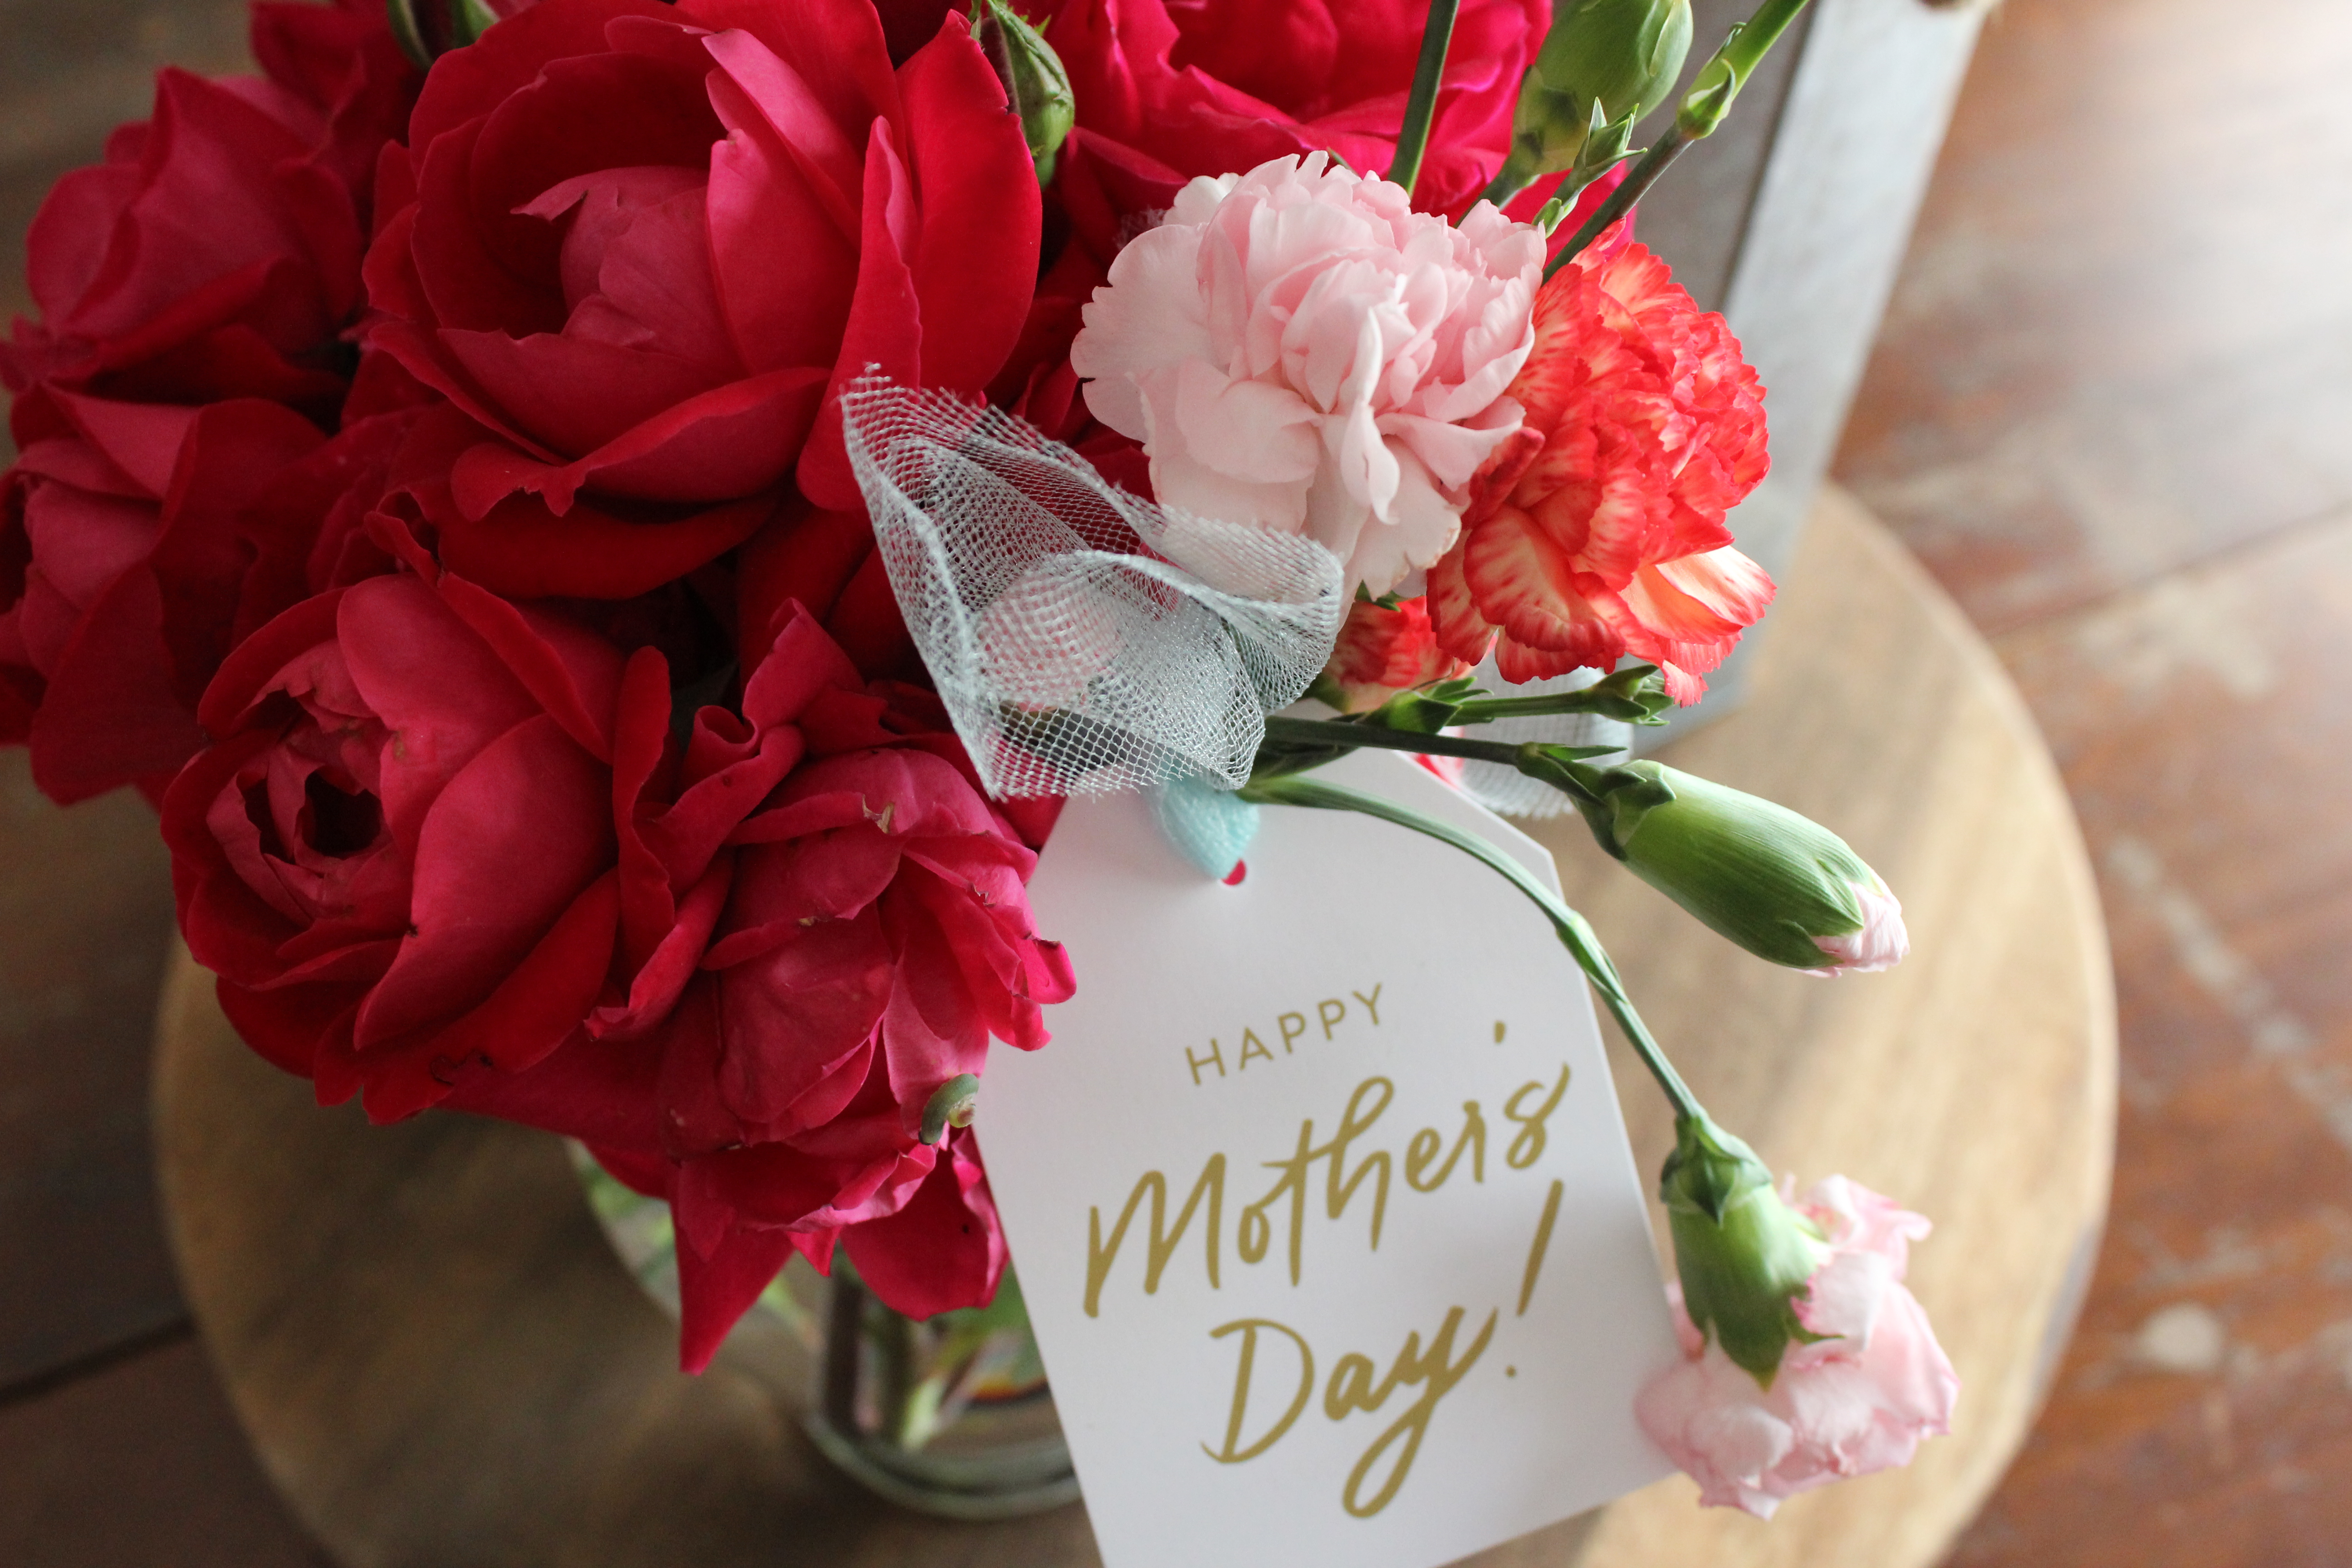 Flowers with a Happy Mother's Day card attached to it.